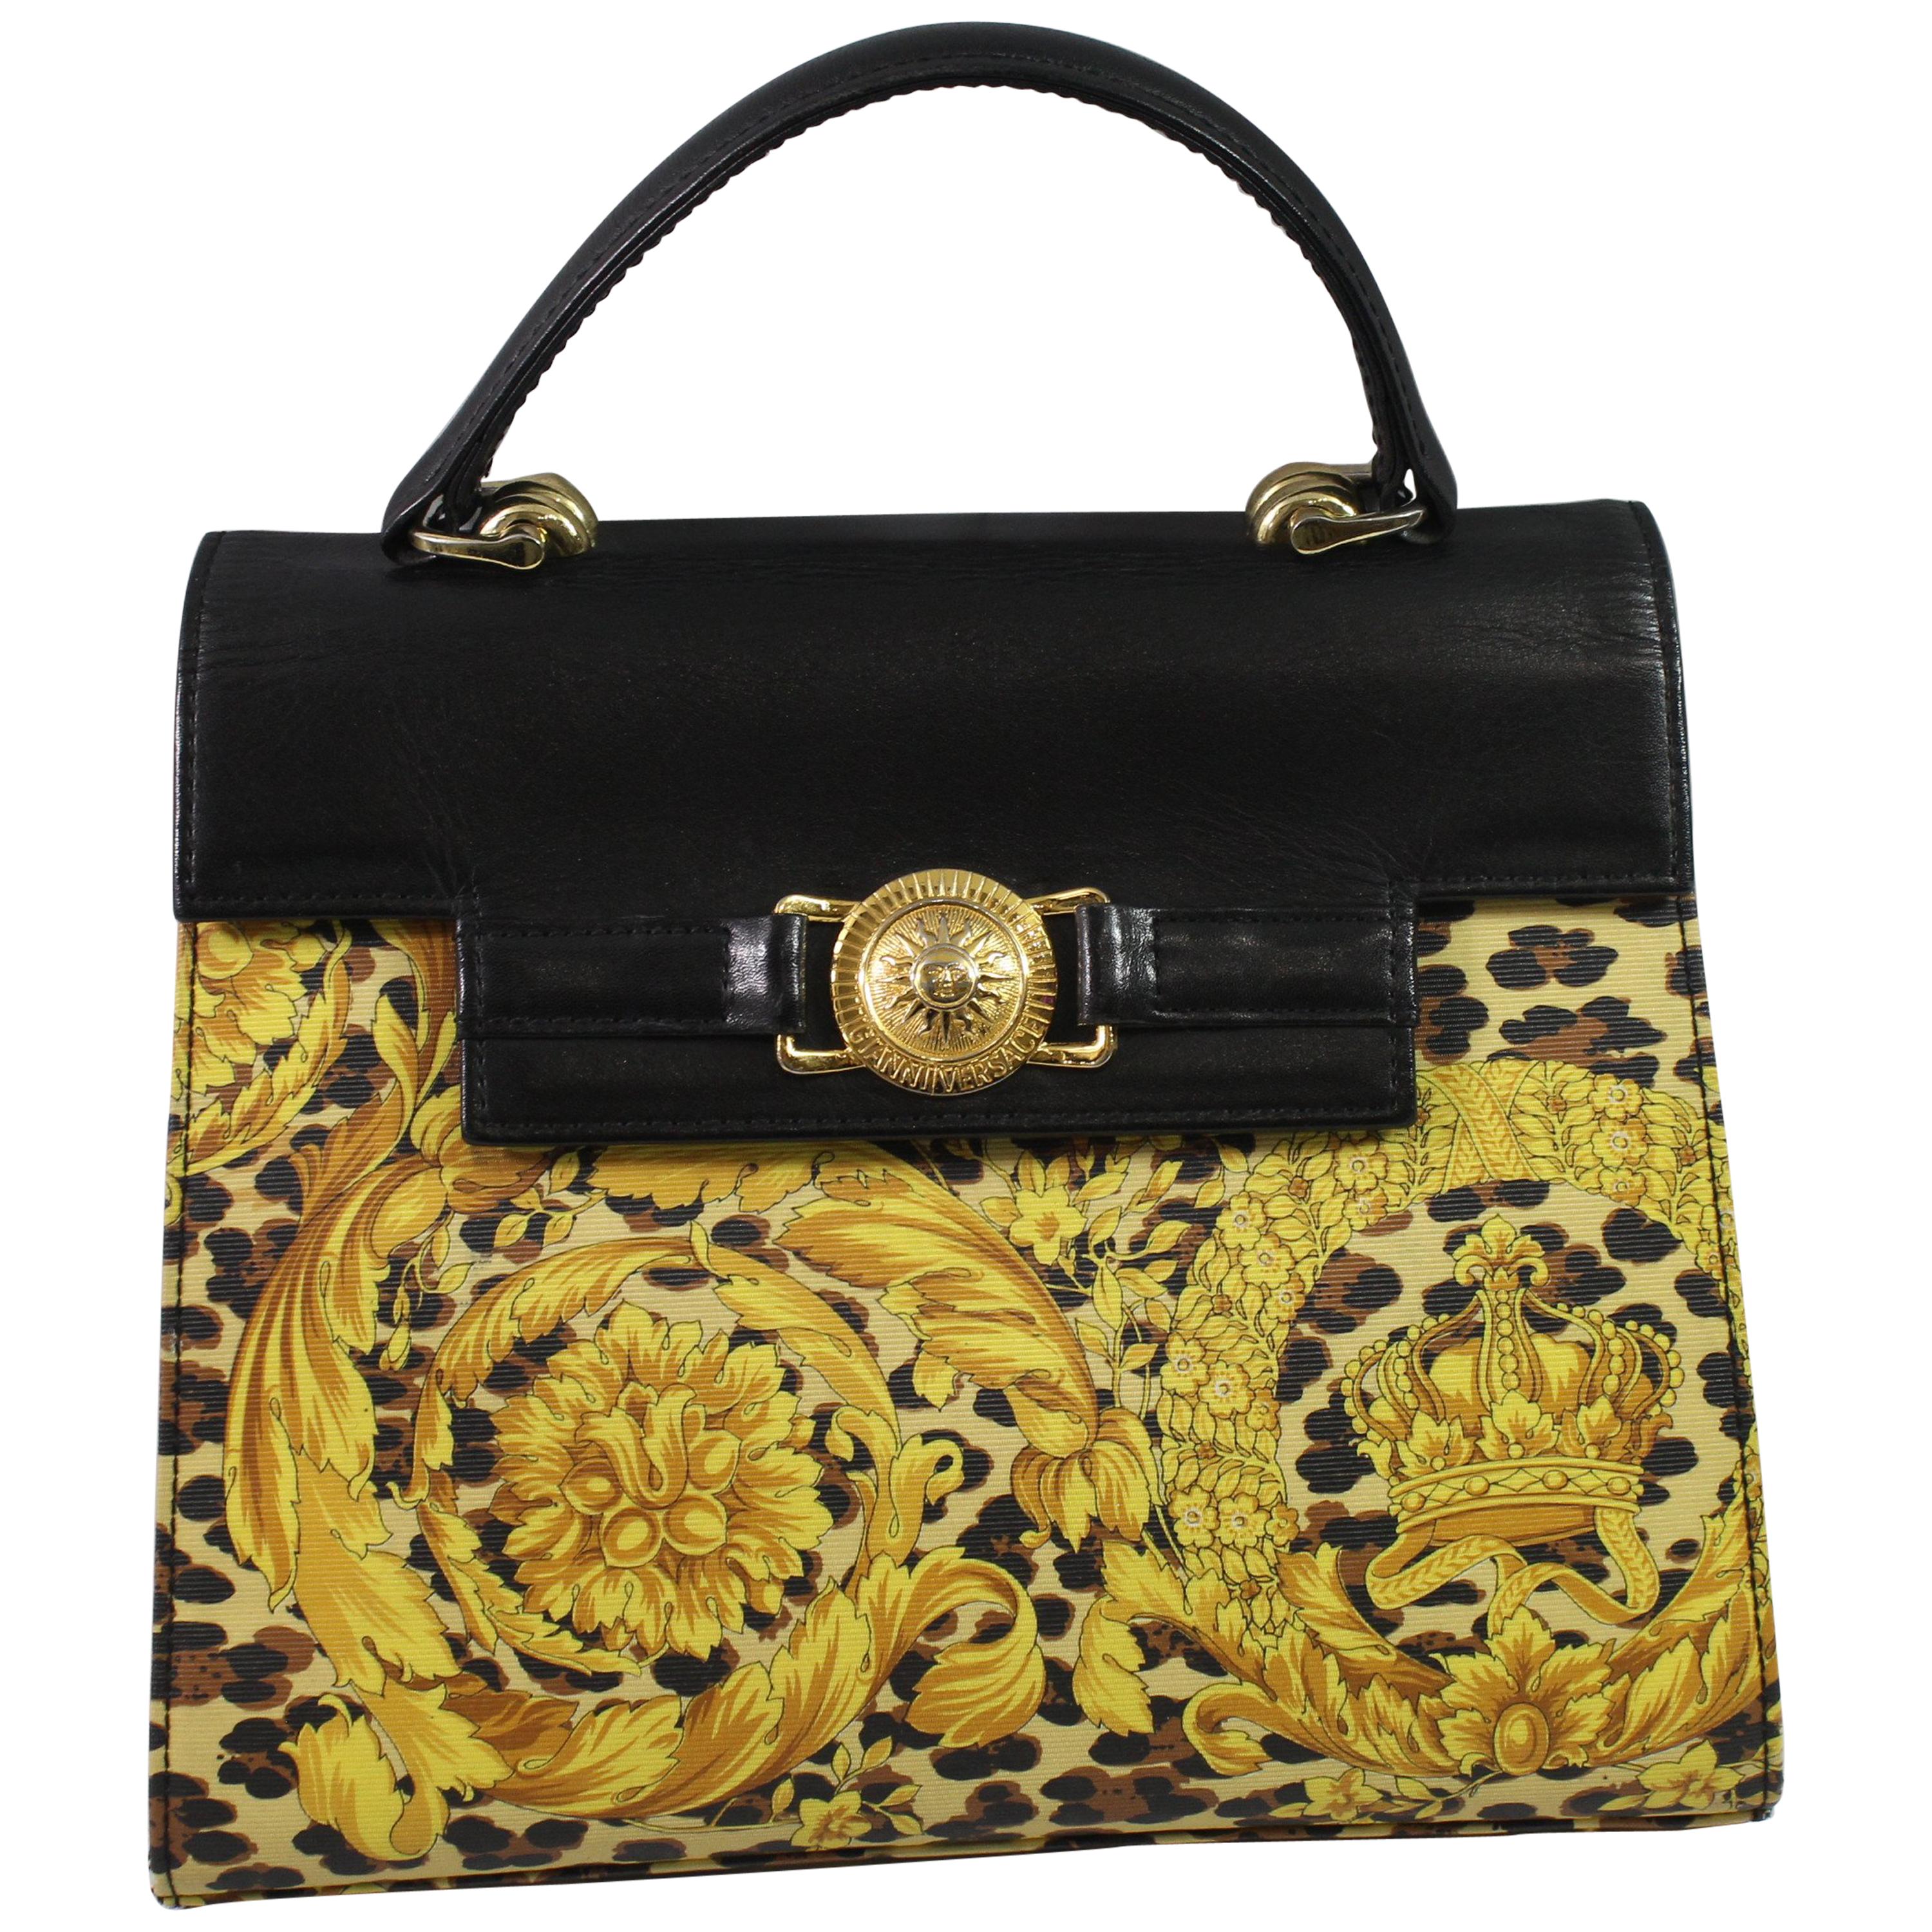 Vintage Gianni versace Kelly Style Baroque Bag